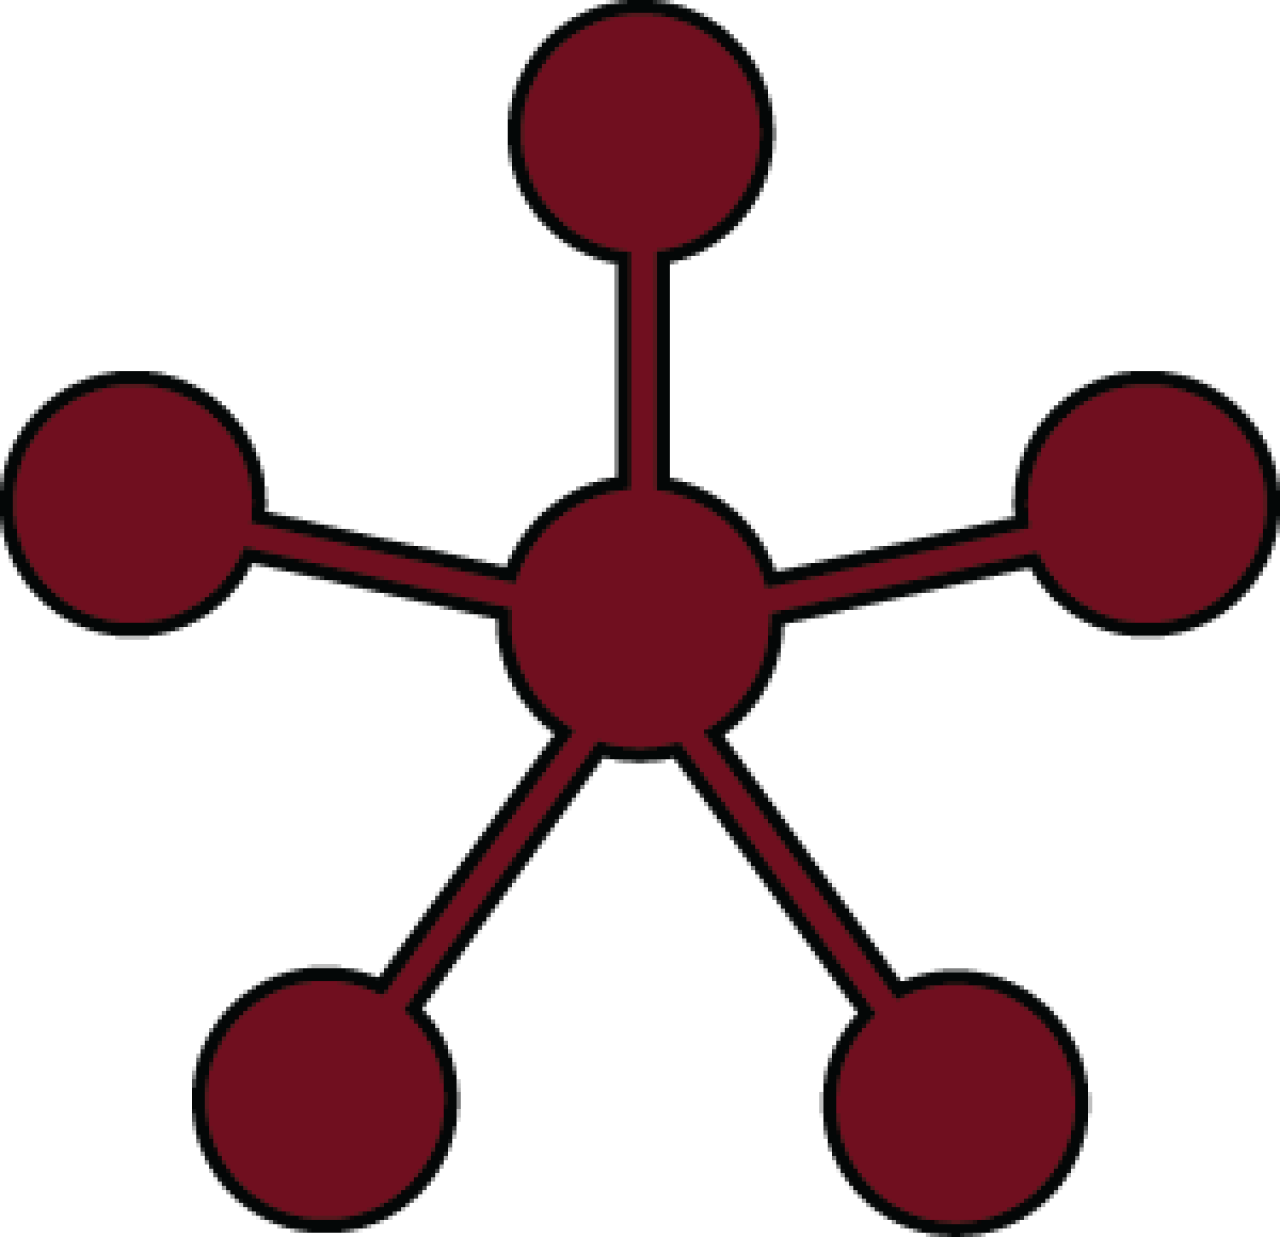 Illustration of a small network